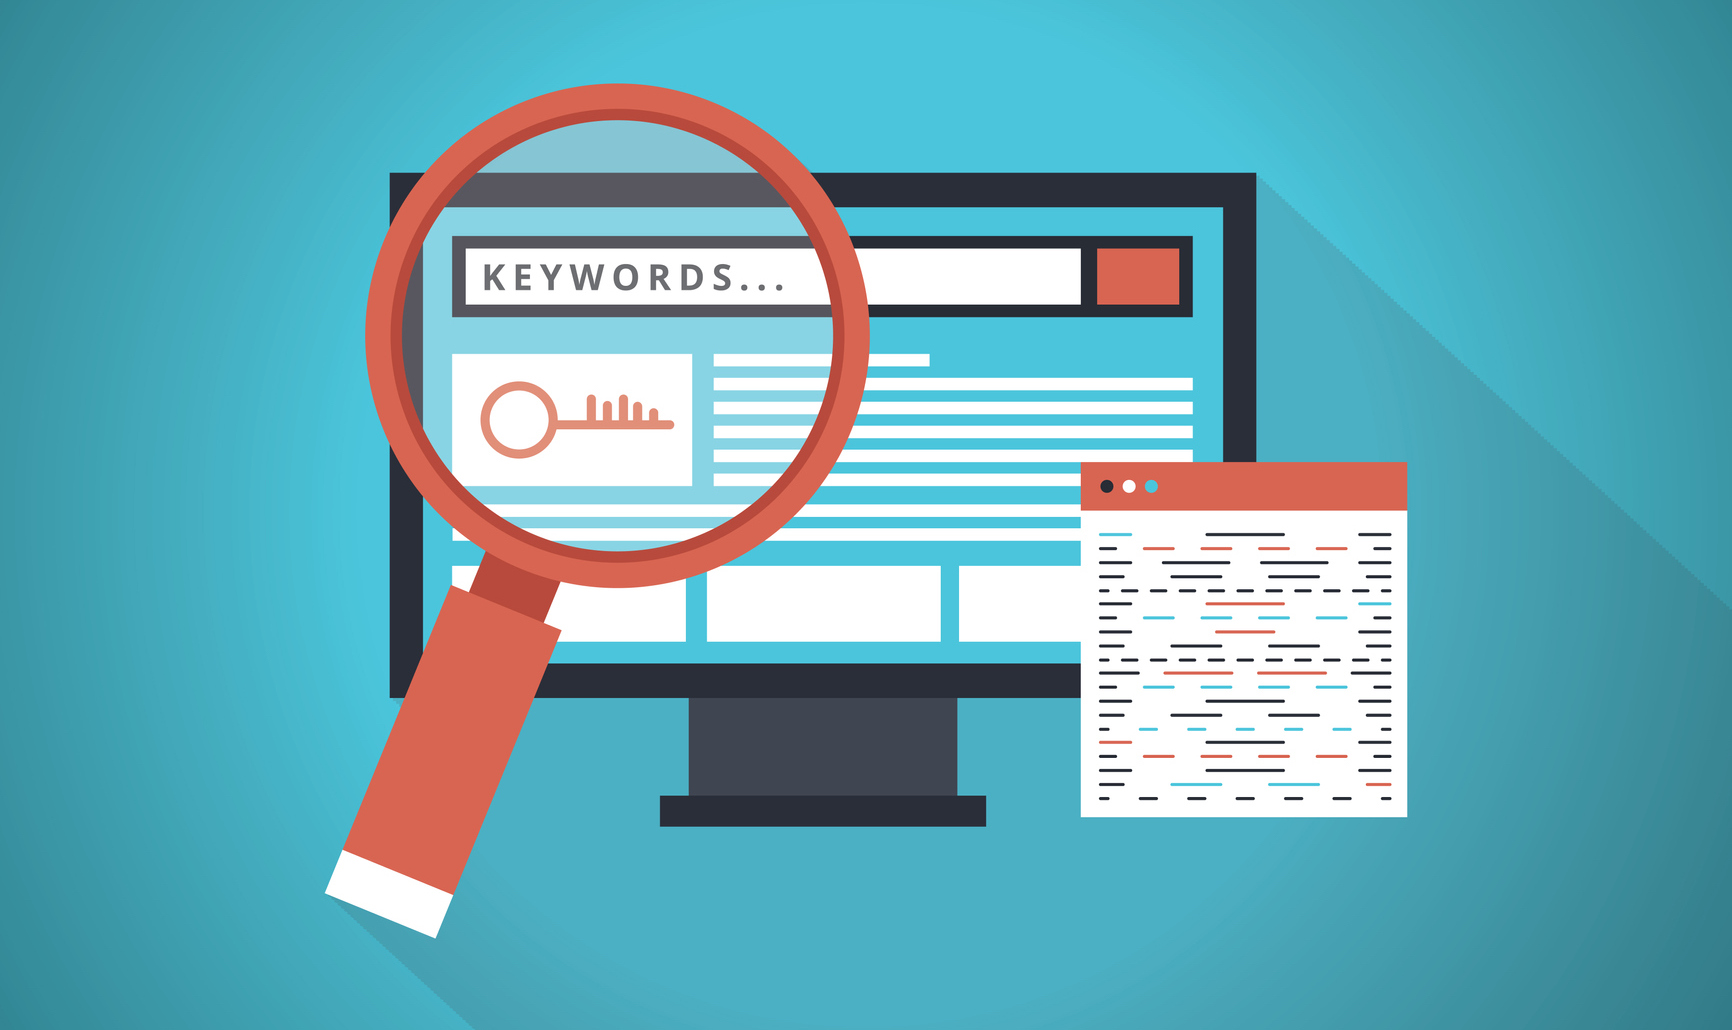 What Is Keyword Stuffing? How to Avoid This Unethical Practice